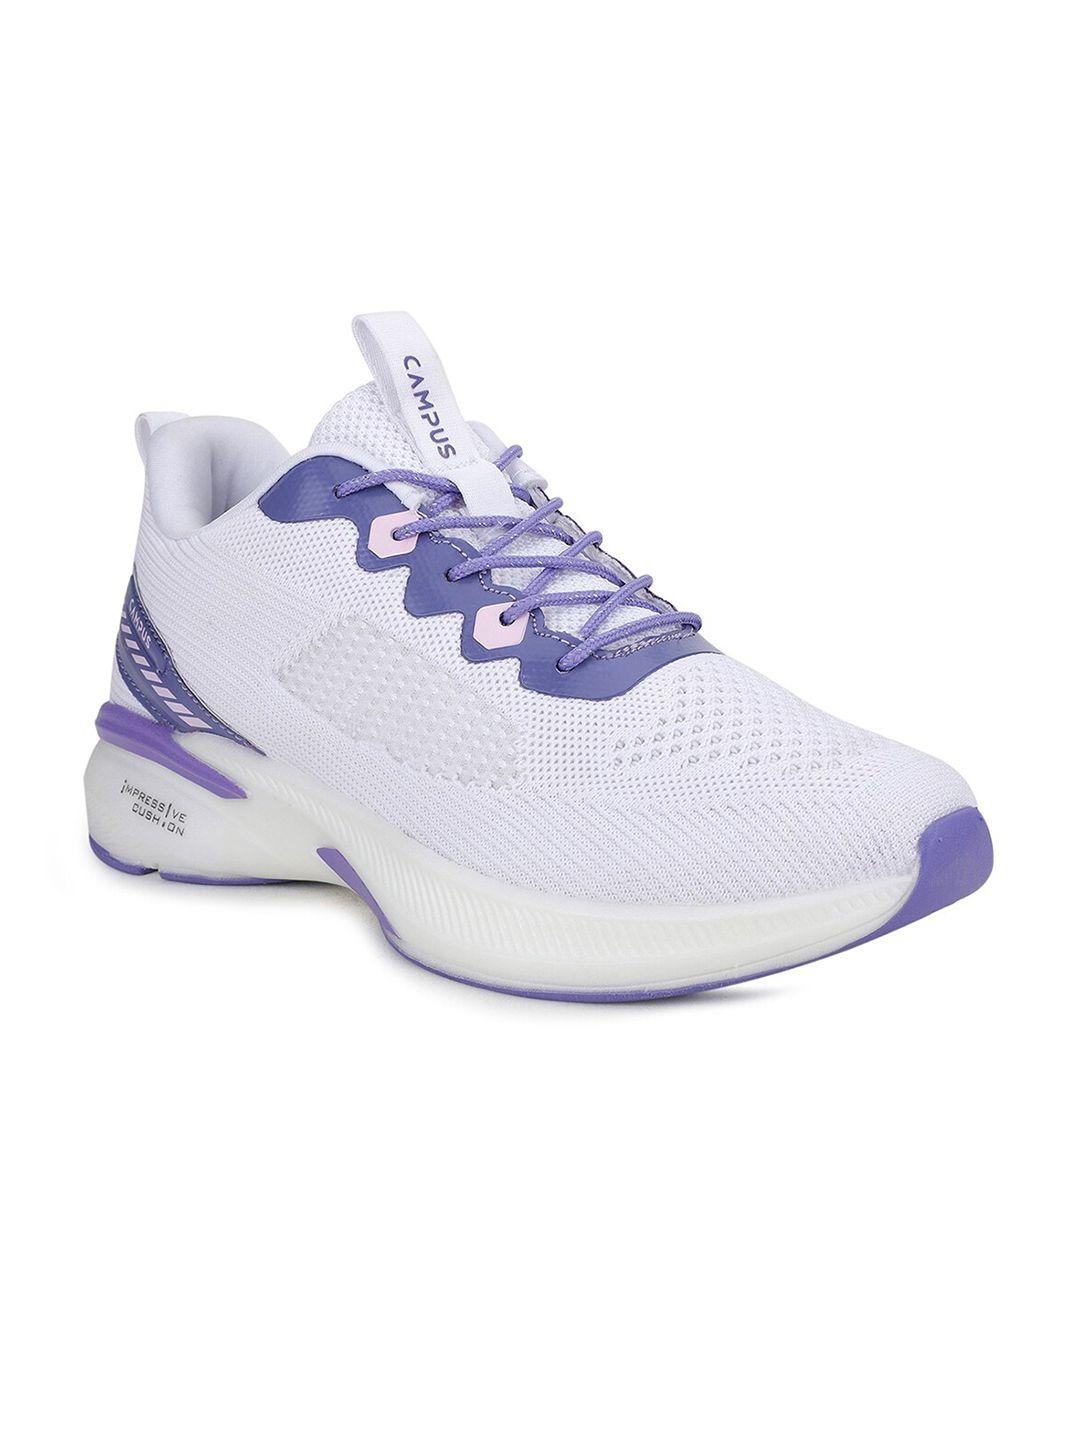 campus-women-olivia-non-marking-running-sports-shoes